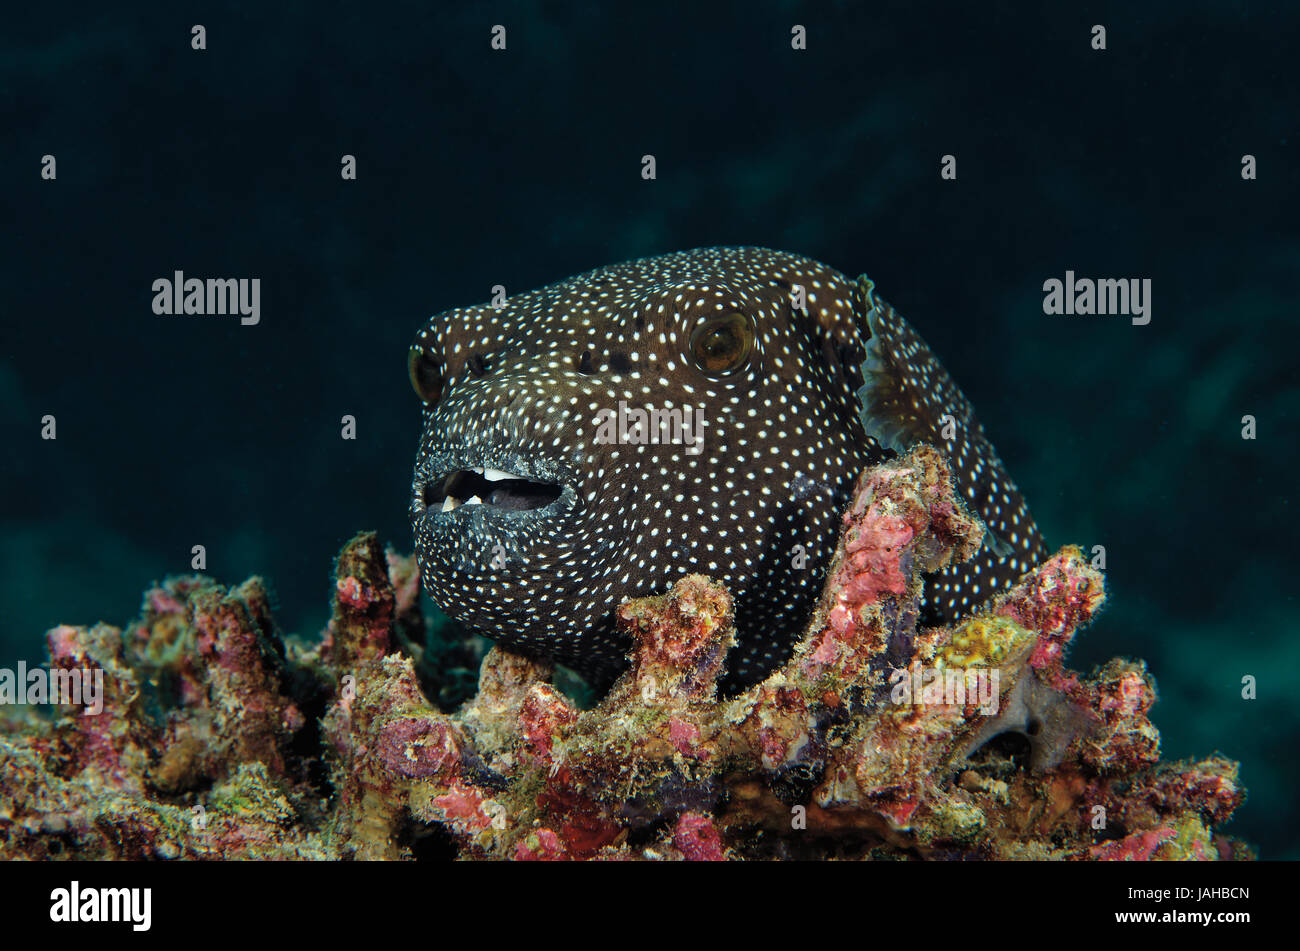 A close-up view of a guineafowl pufferfish, Arothron meleagris, resting on coral reef in Maldives Stock Photo